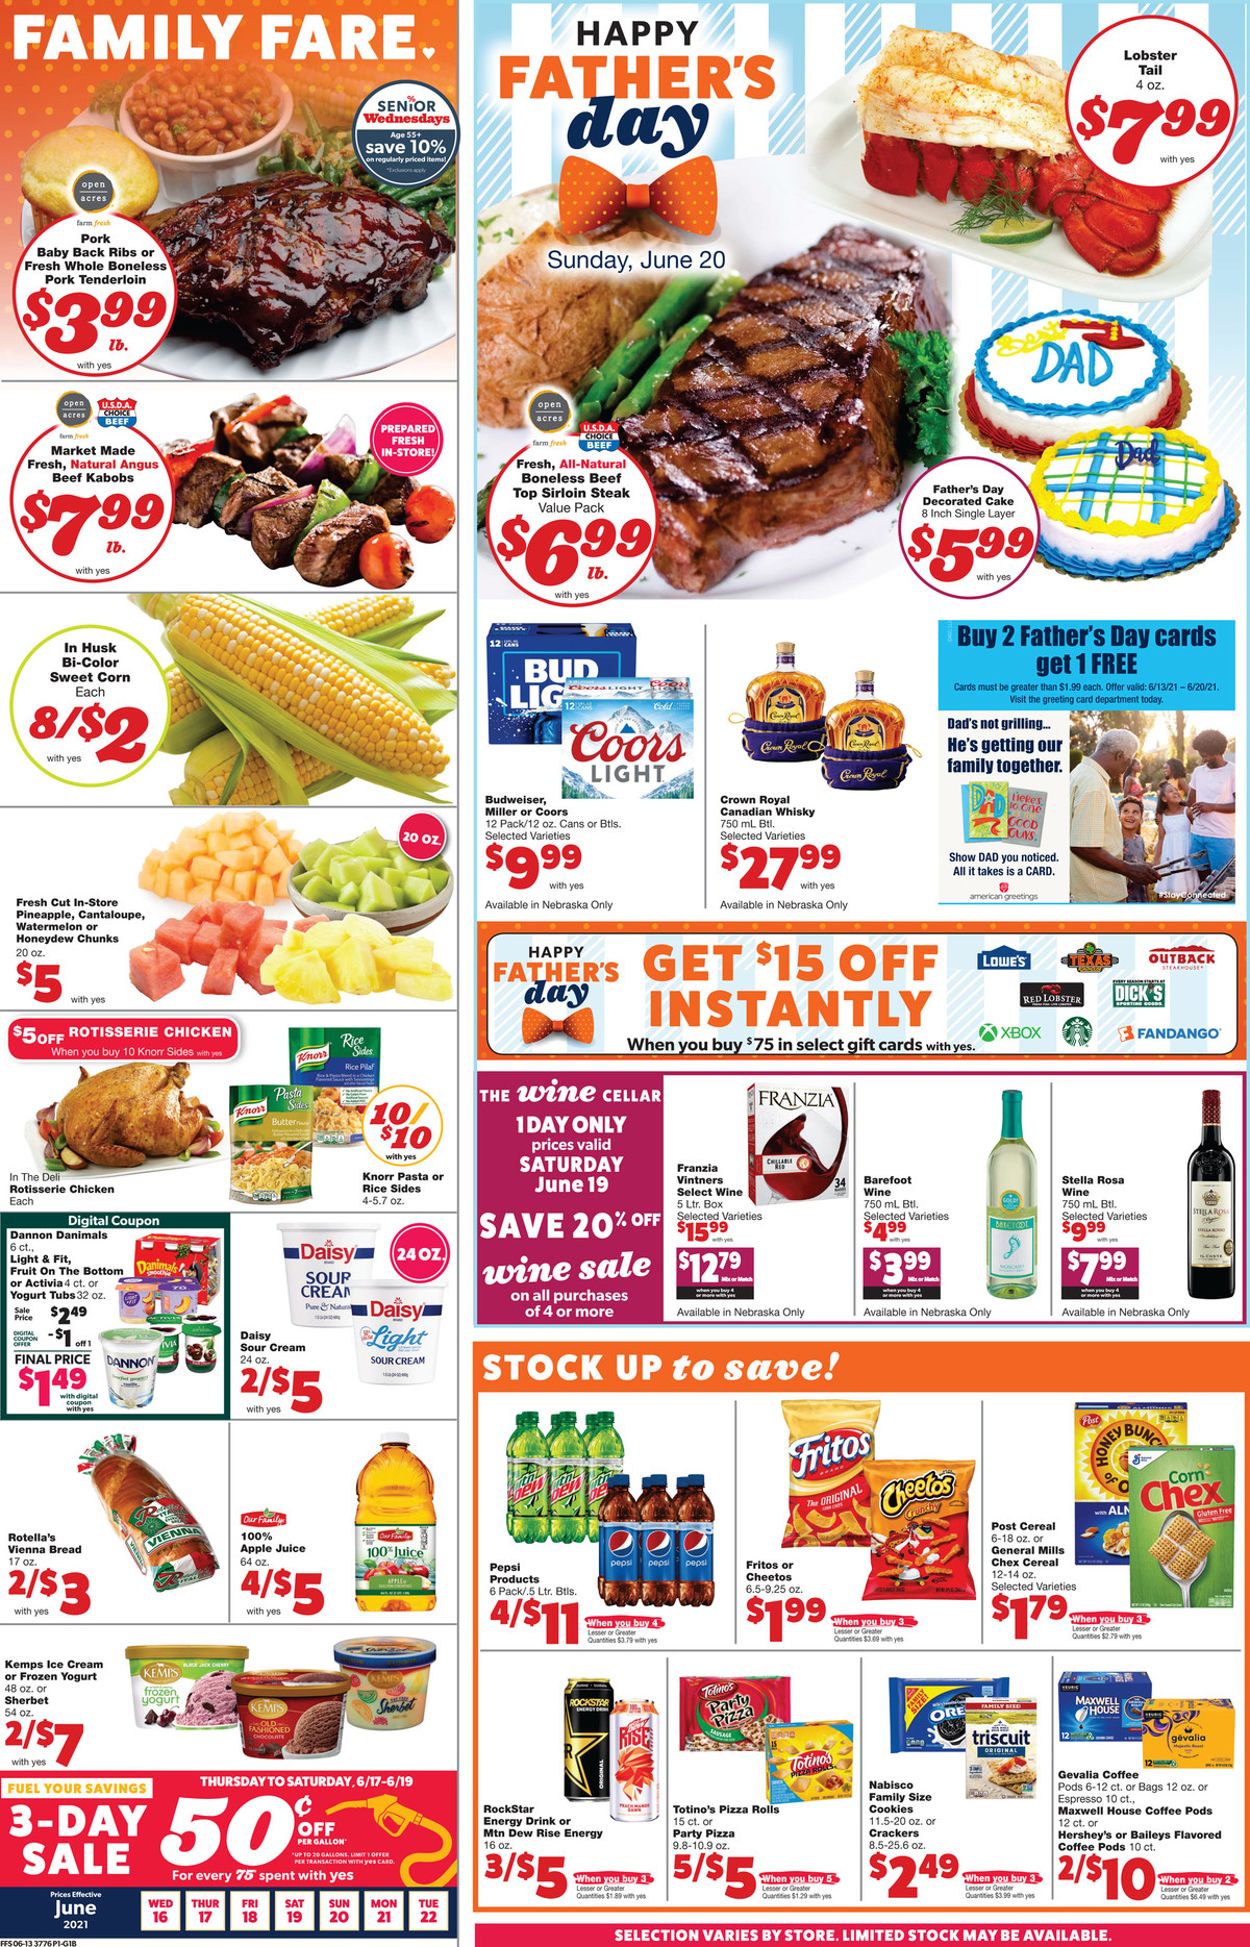 Family Fare Current weekly ad 06/16 - 06/22/2021 - frequent-ads.com